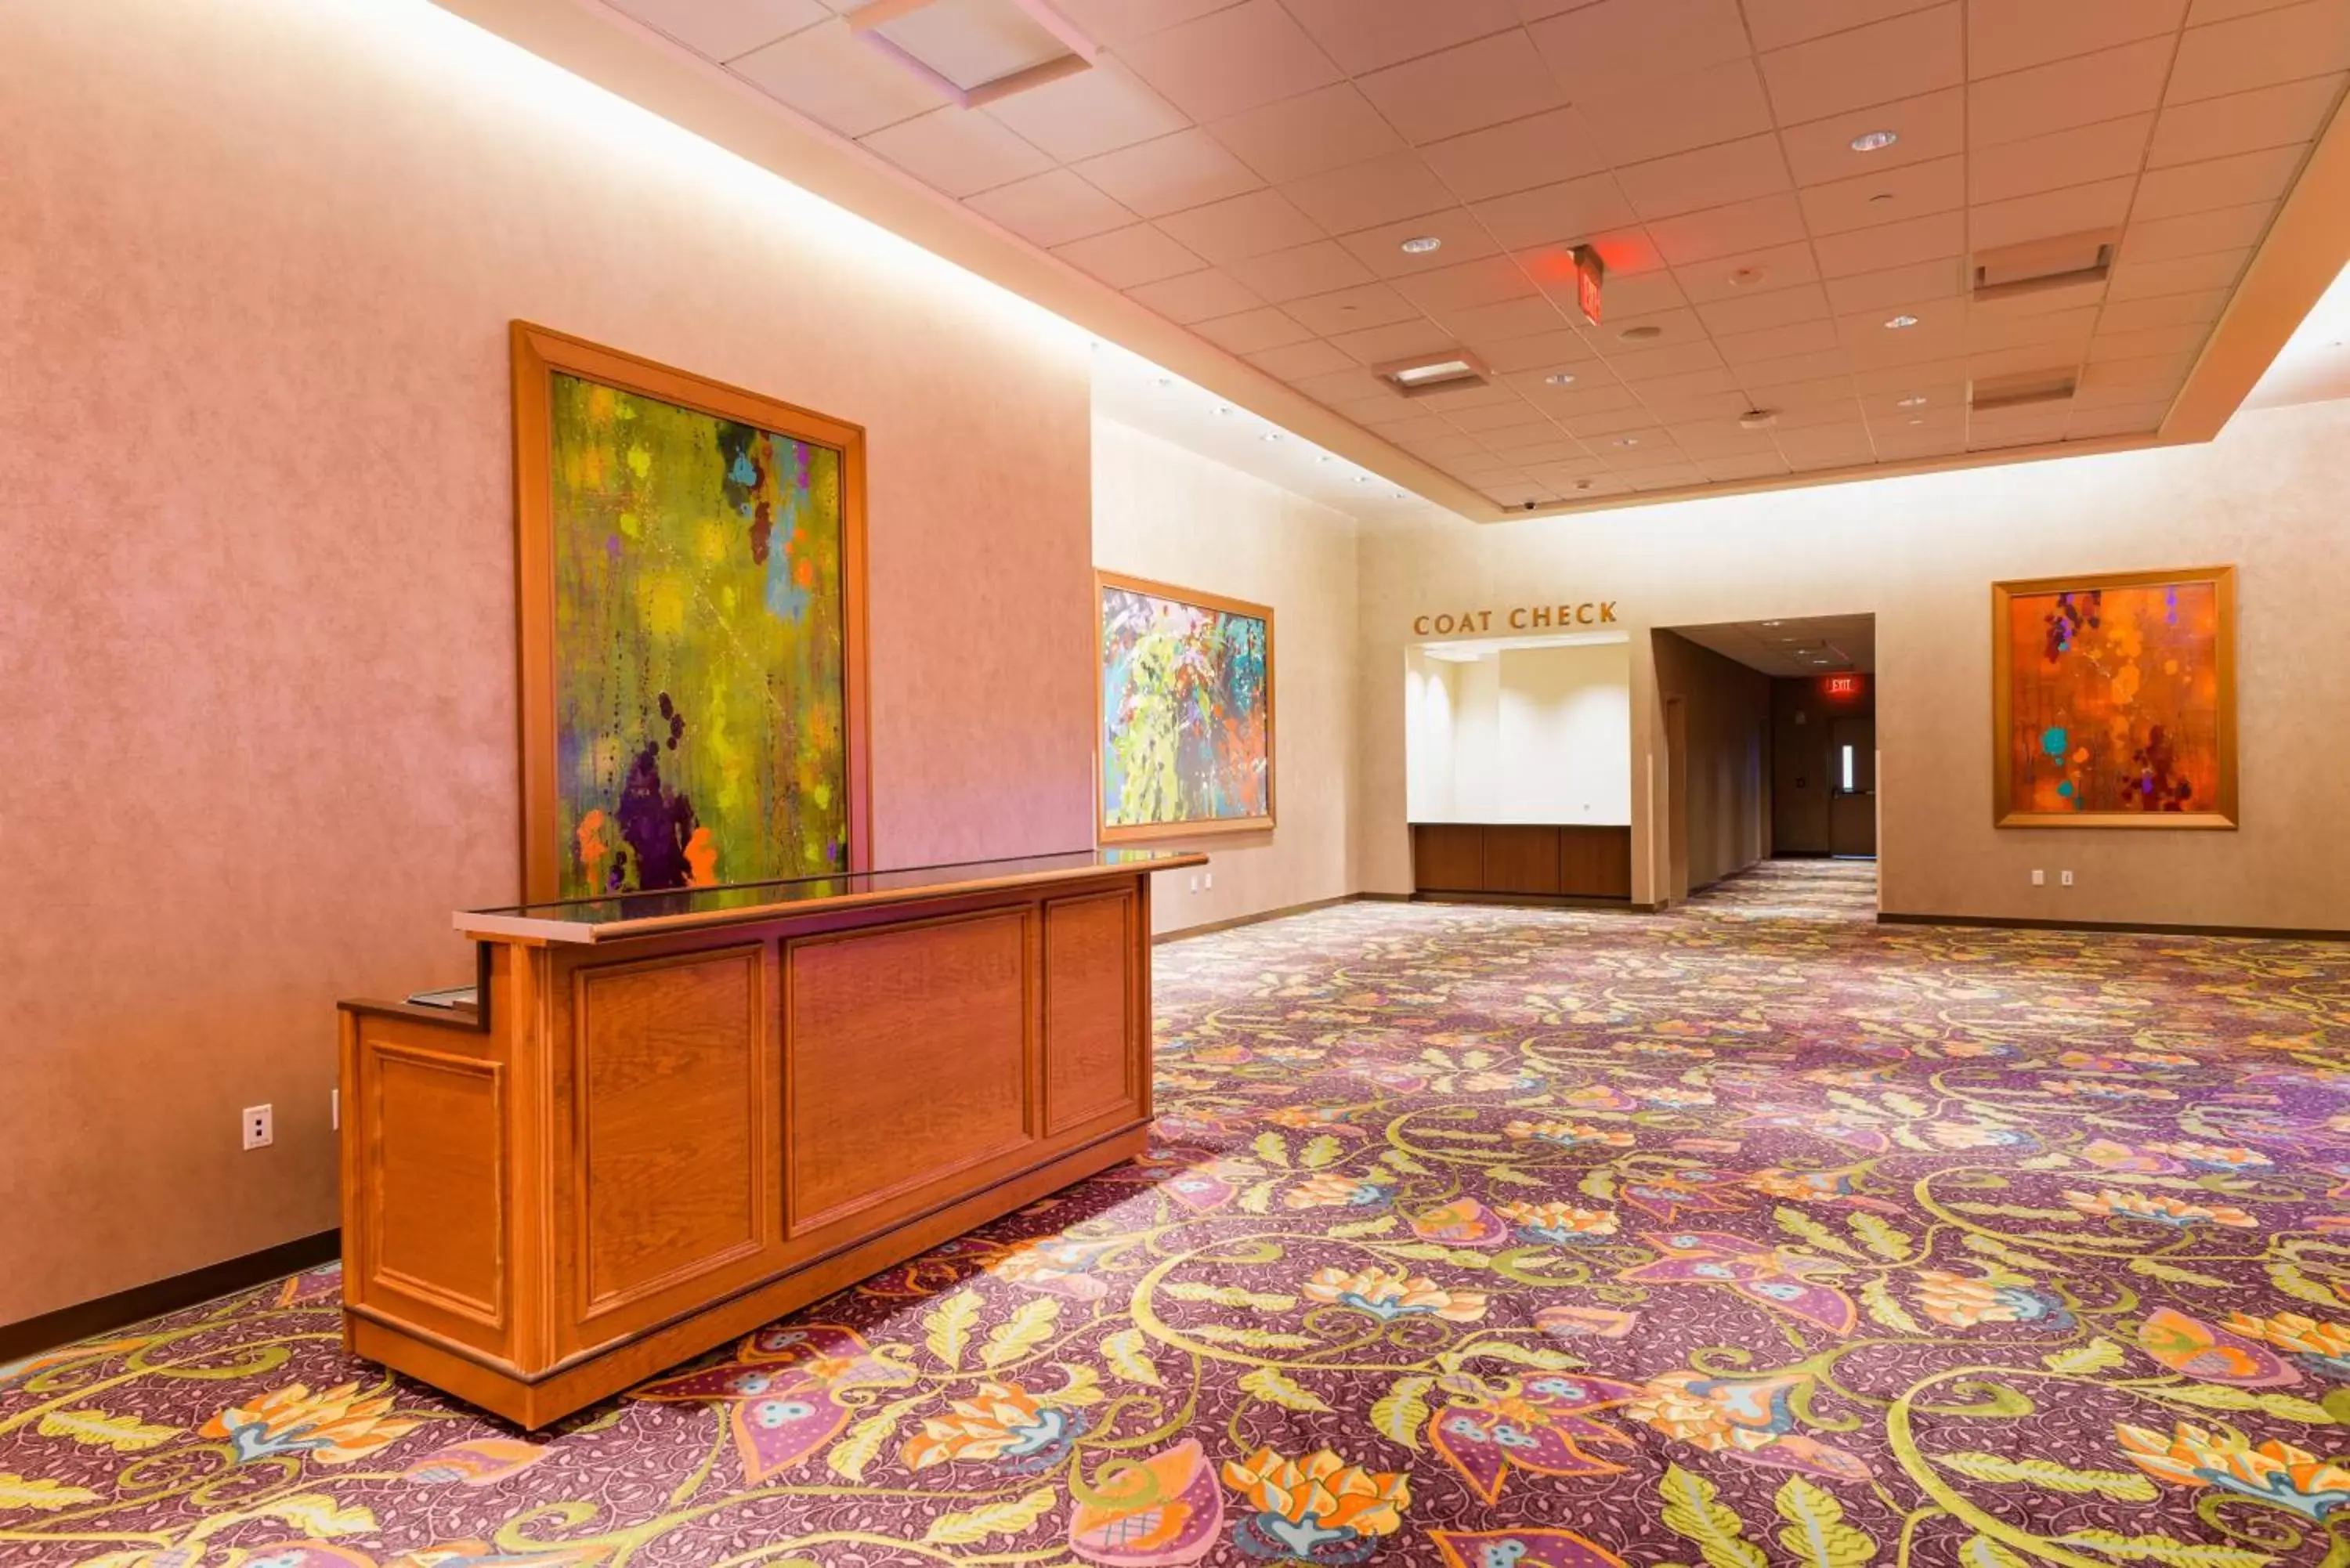 Banquet/Function facilities, Lobby/Reception in Tioga Downs Casino and Resort